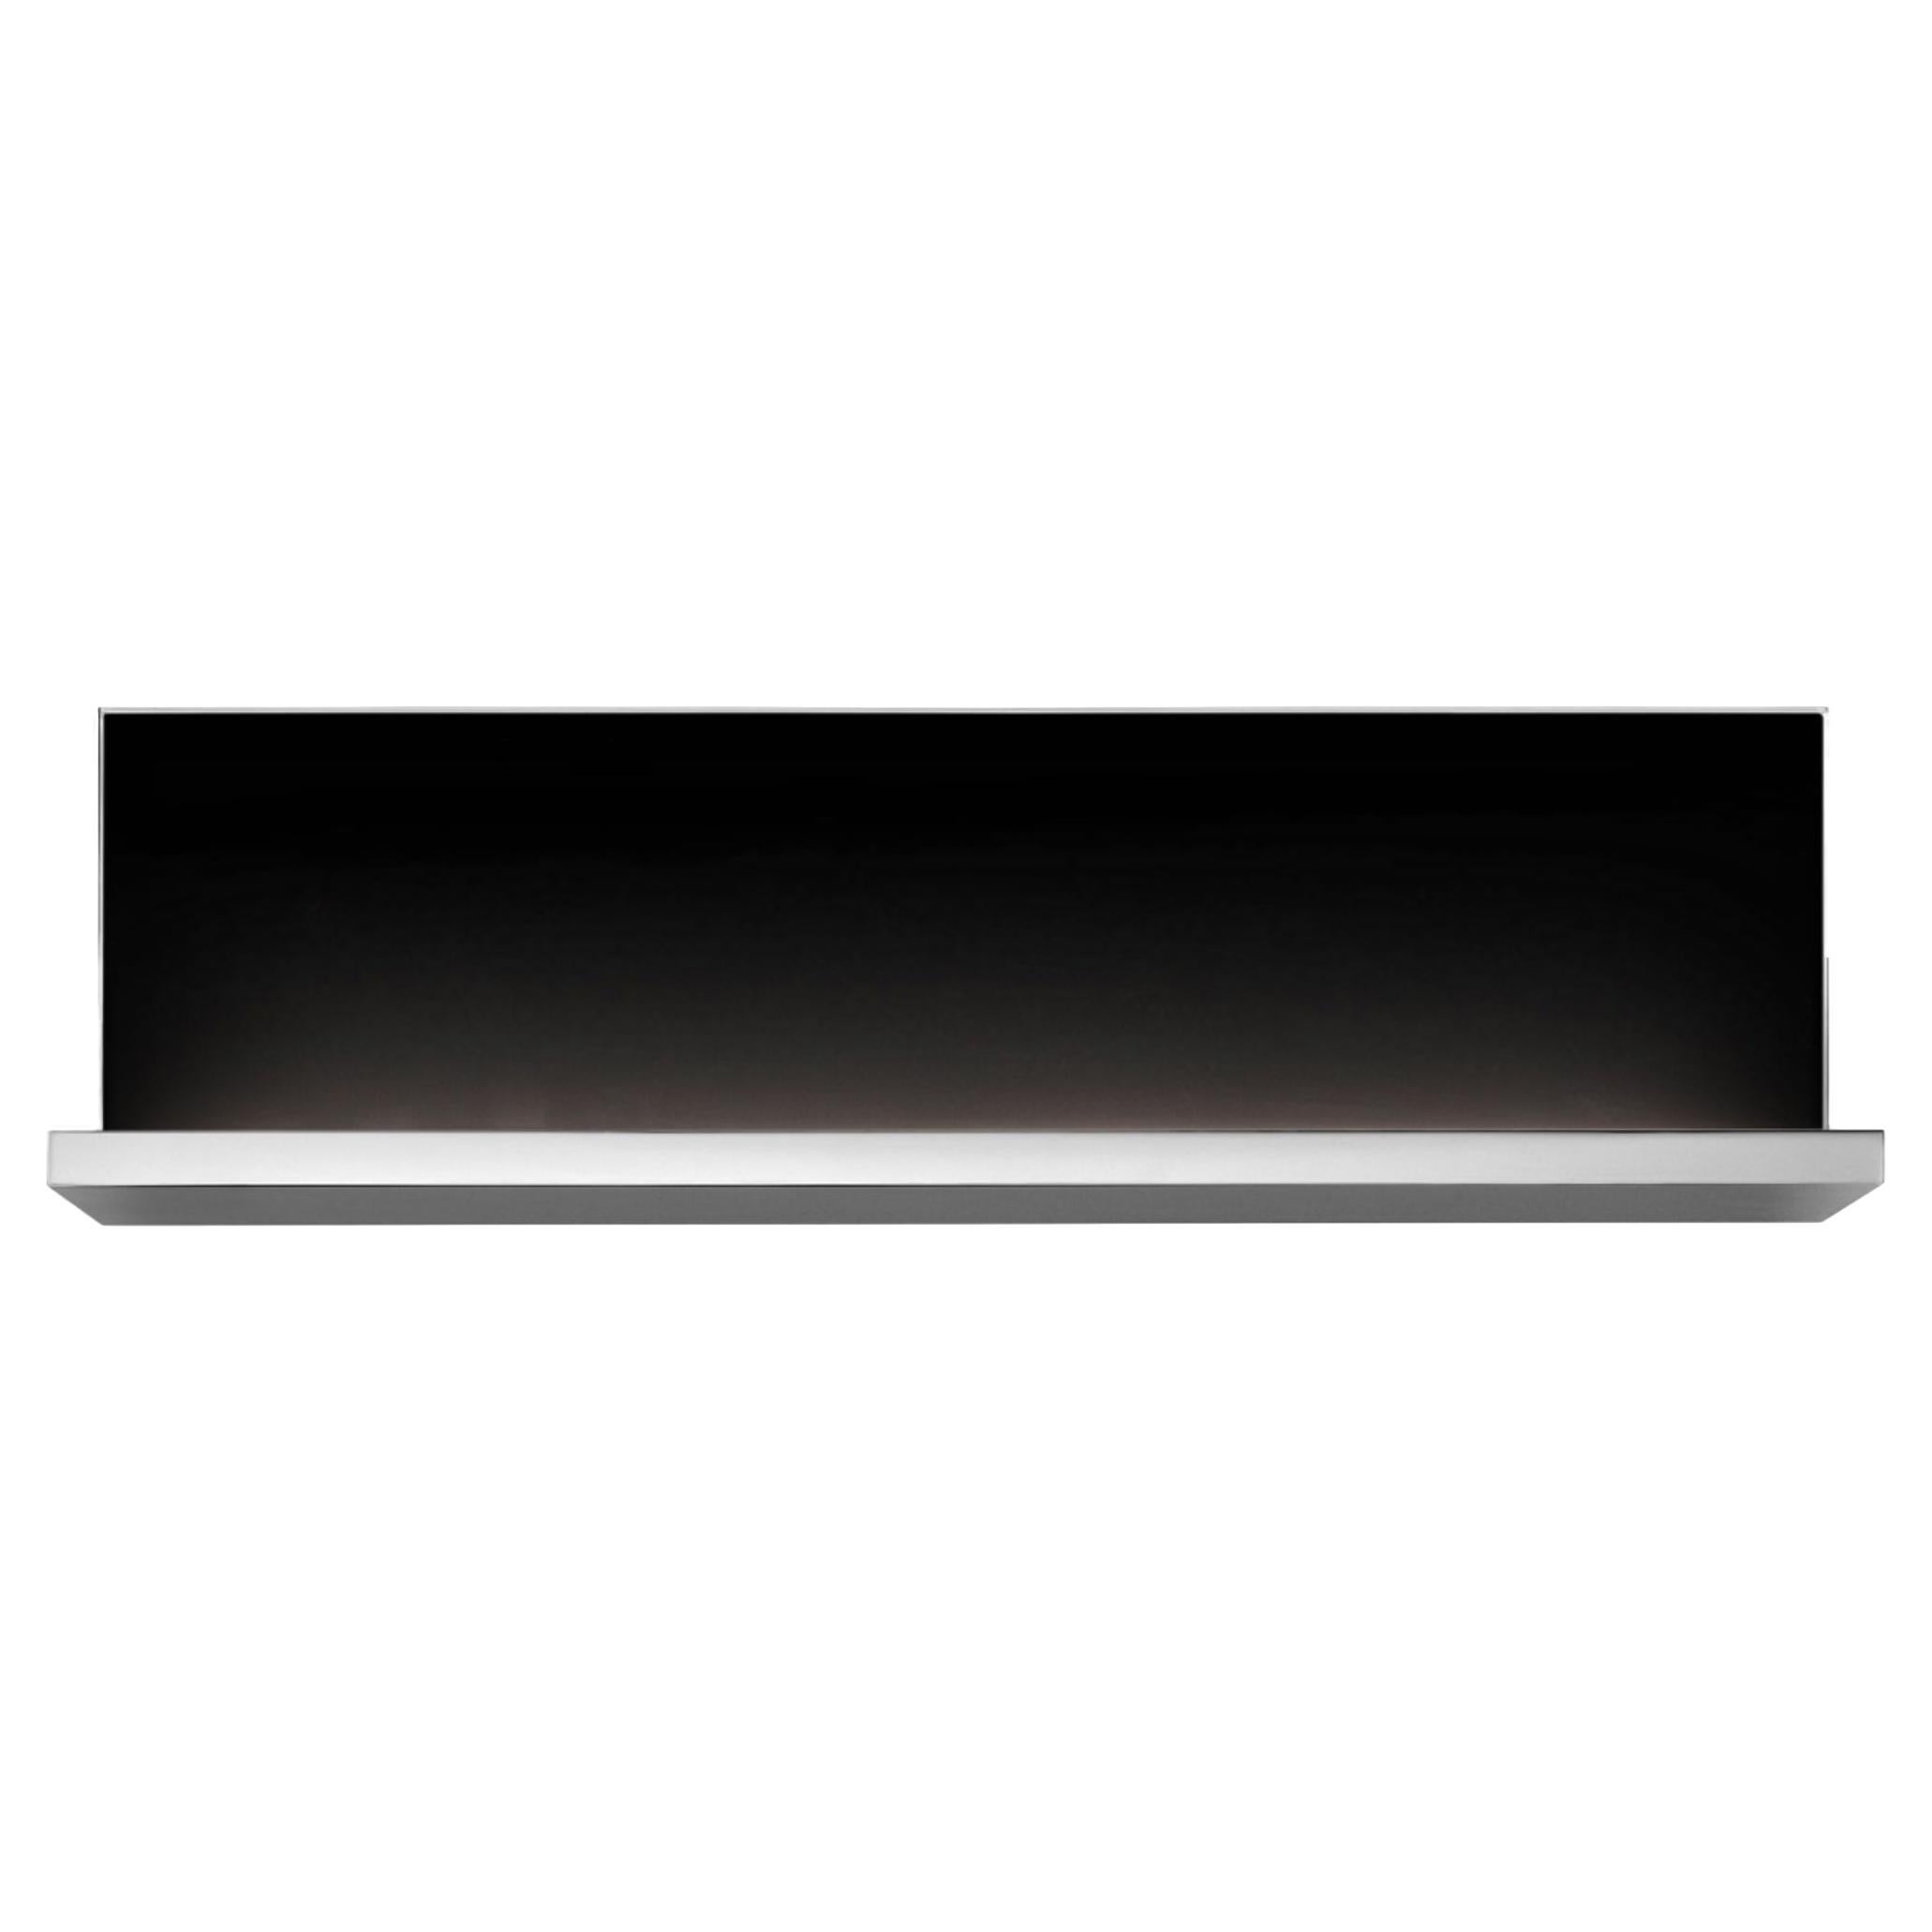 Philippe Starck for Flos Hide L Wall Light Sconce, Large, Black, Shelf, Italy.